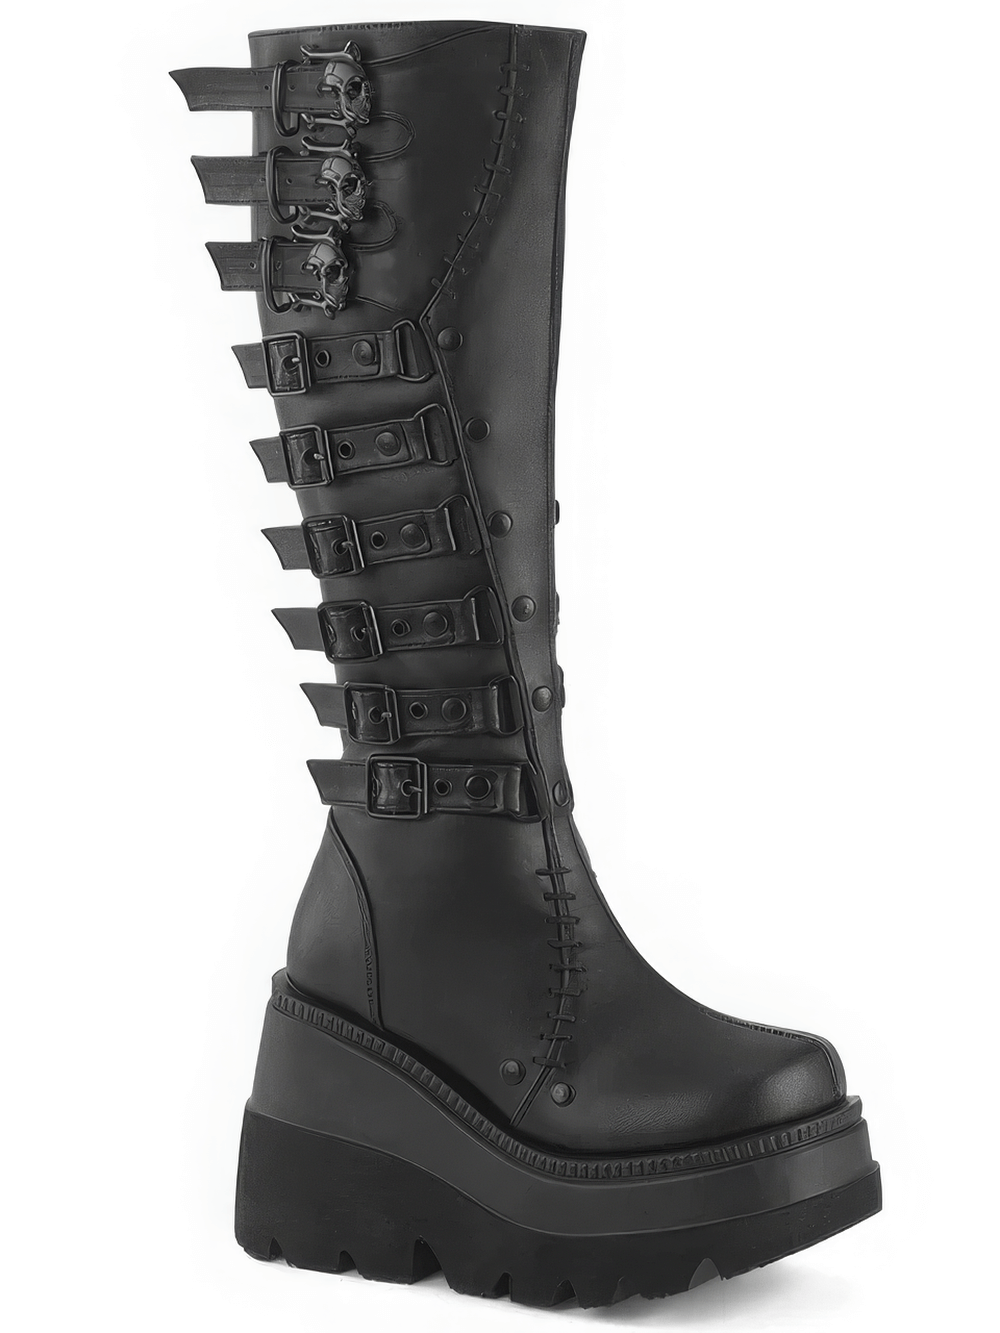 DEMONIA Dramatic Knee-High Boots with Skull Buckles